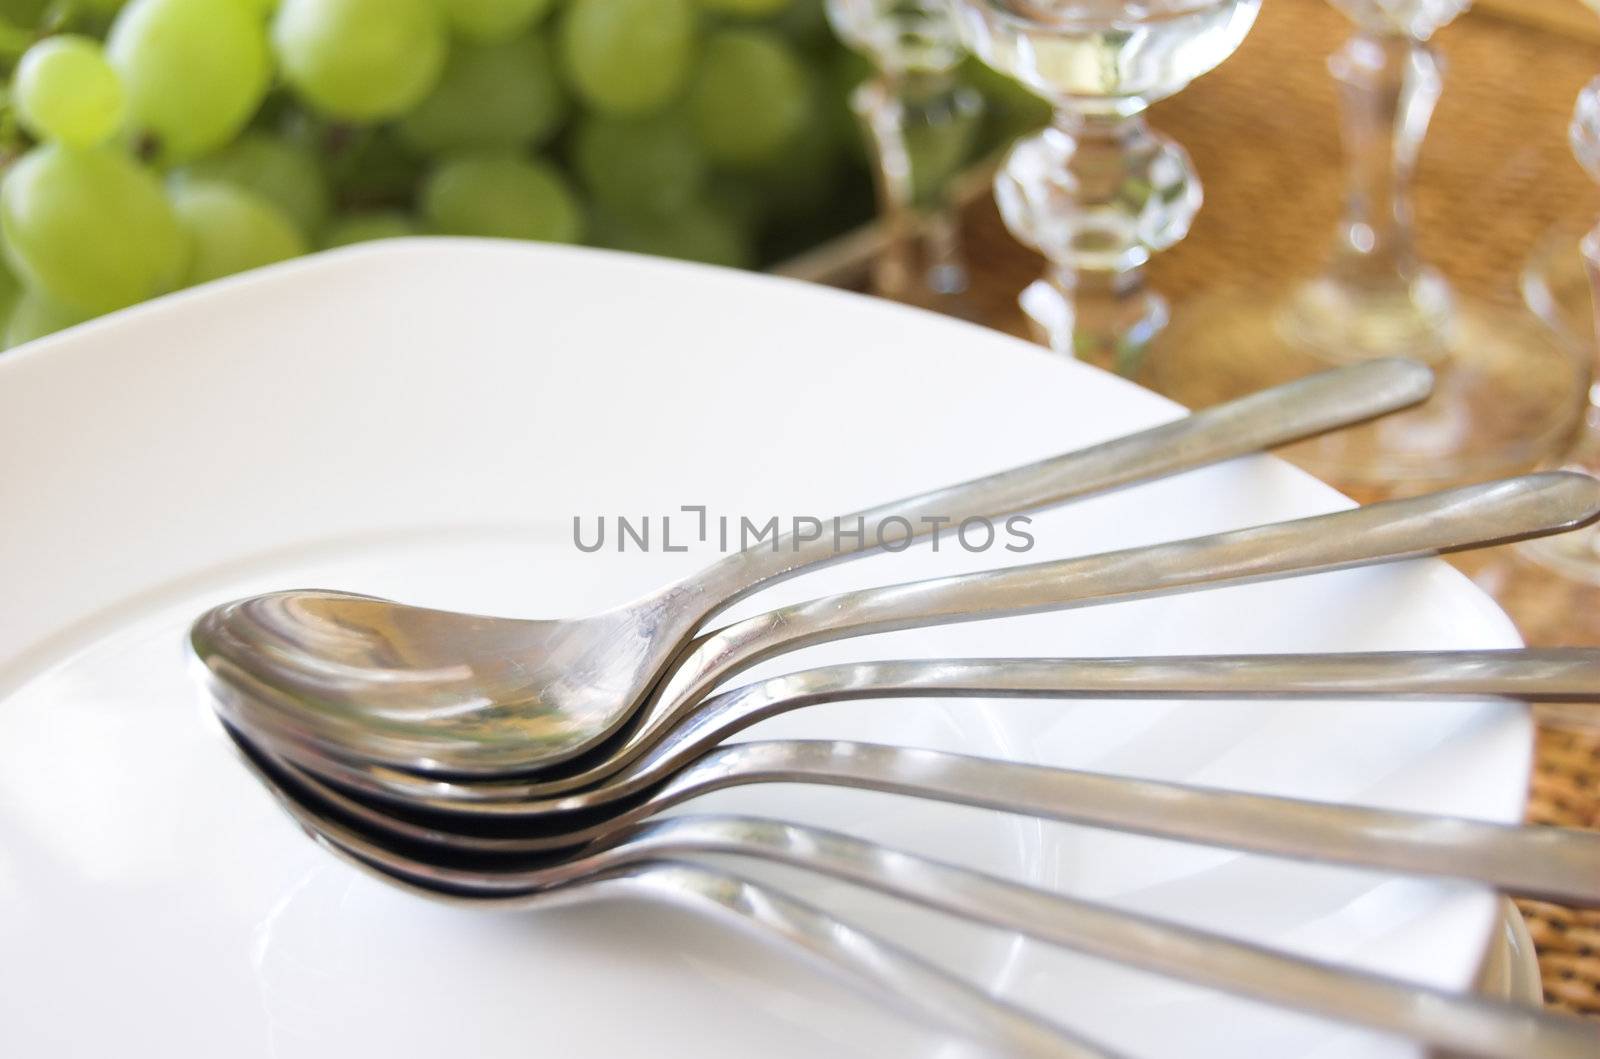 Luxury table setting with bunch of grapes, plate, spoon and wine glasses